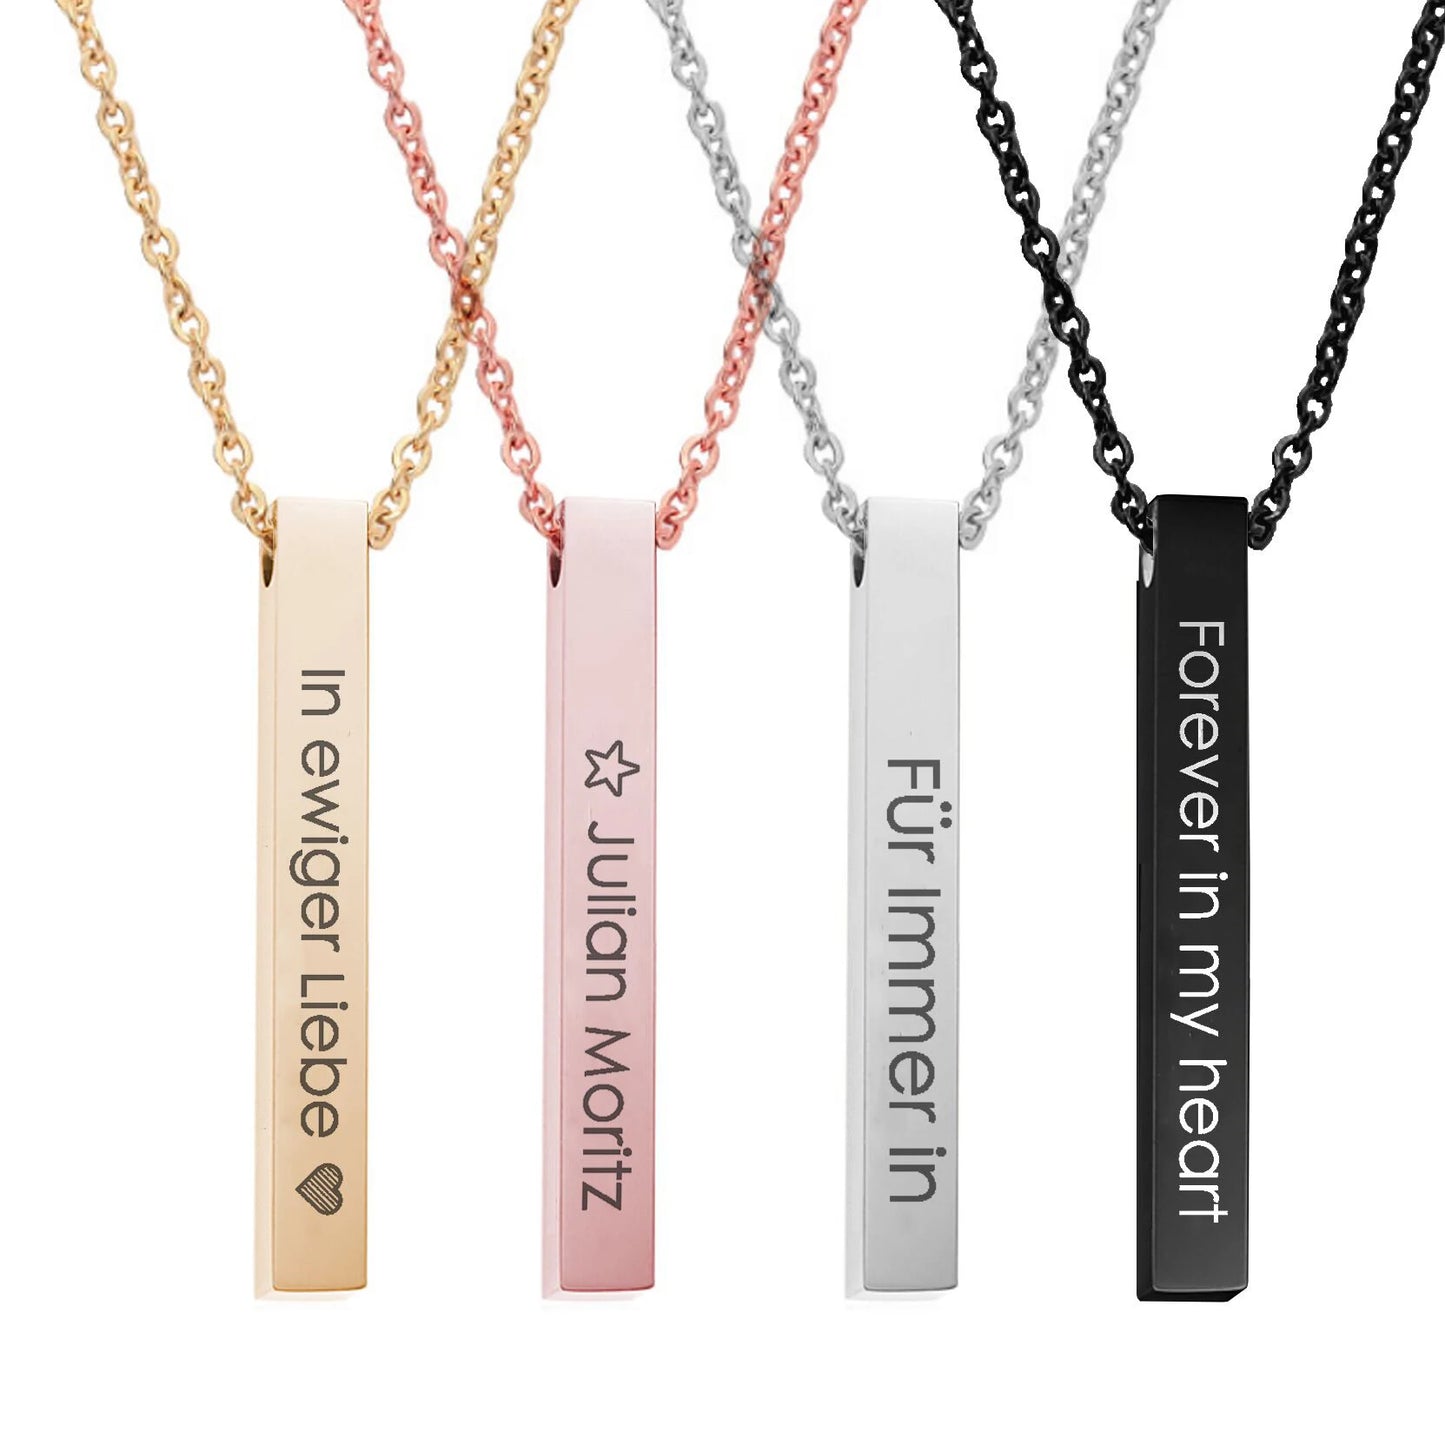 Black Bar Necklace Engrave Names and Initials Date Customized Coordinate Stainless Steel Shiny Bar Pendant Men Women Jewelry